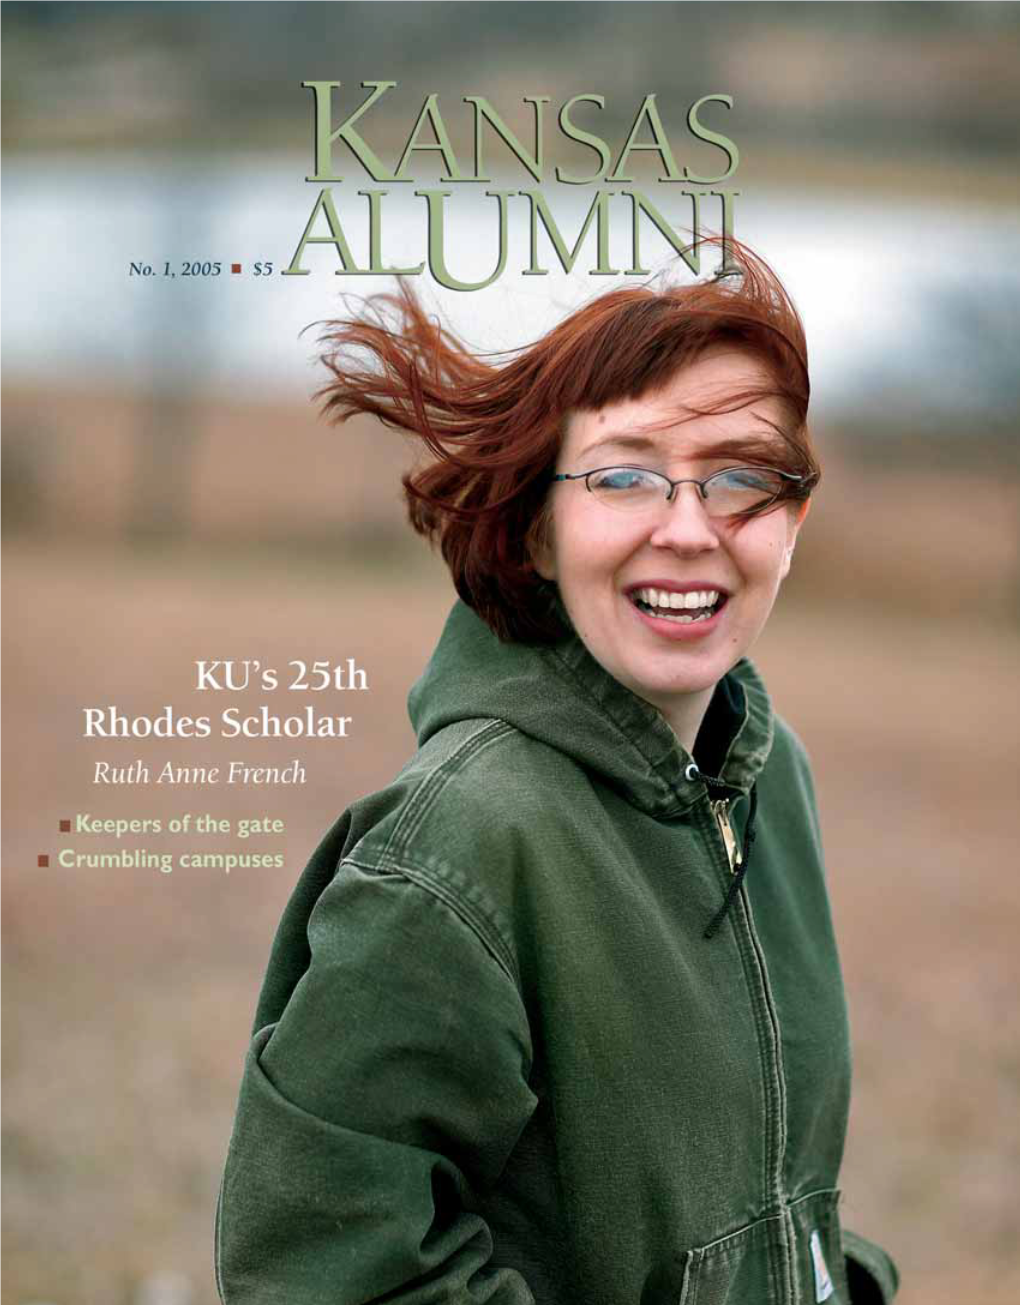 Her Upbringing on a Reno County Farm Prepared Ruth Anne French to Excel. with a Rhodes Scholarship, She Takes the Next Step on Her Path to Public Service